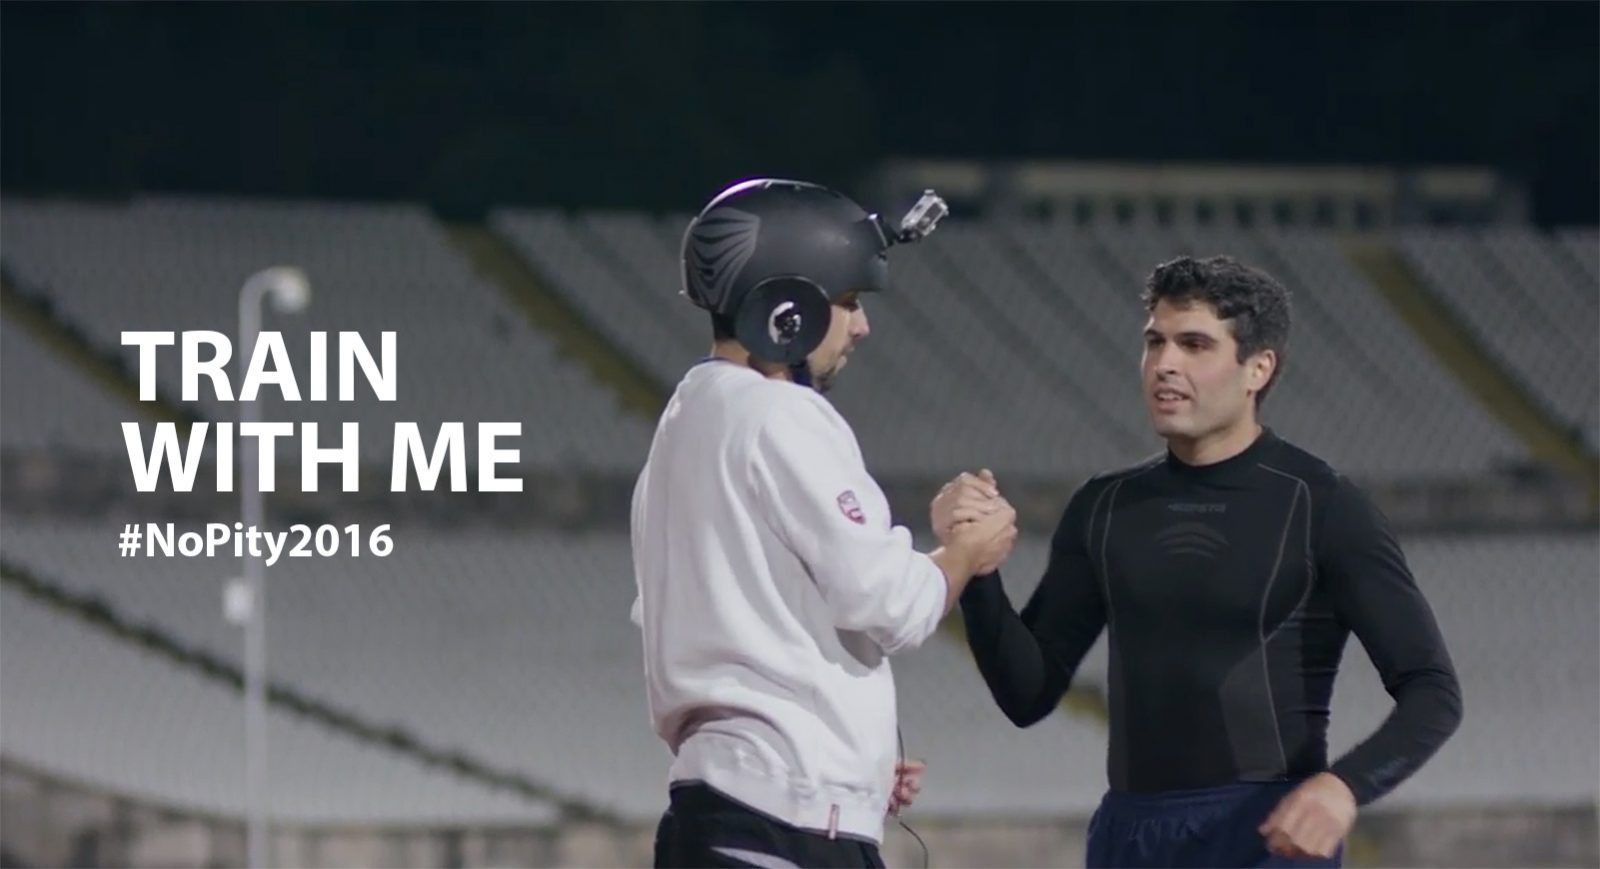 National Paralympic Committee of Portugal - Train With Me #NoPity2016